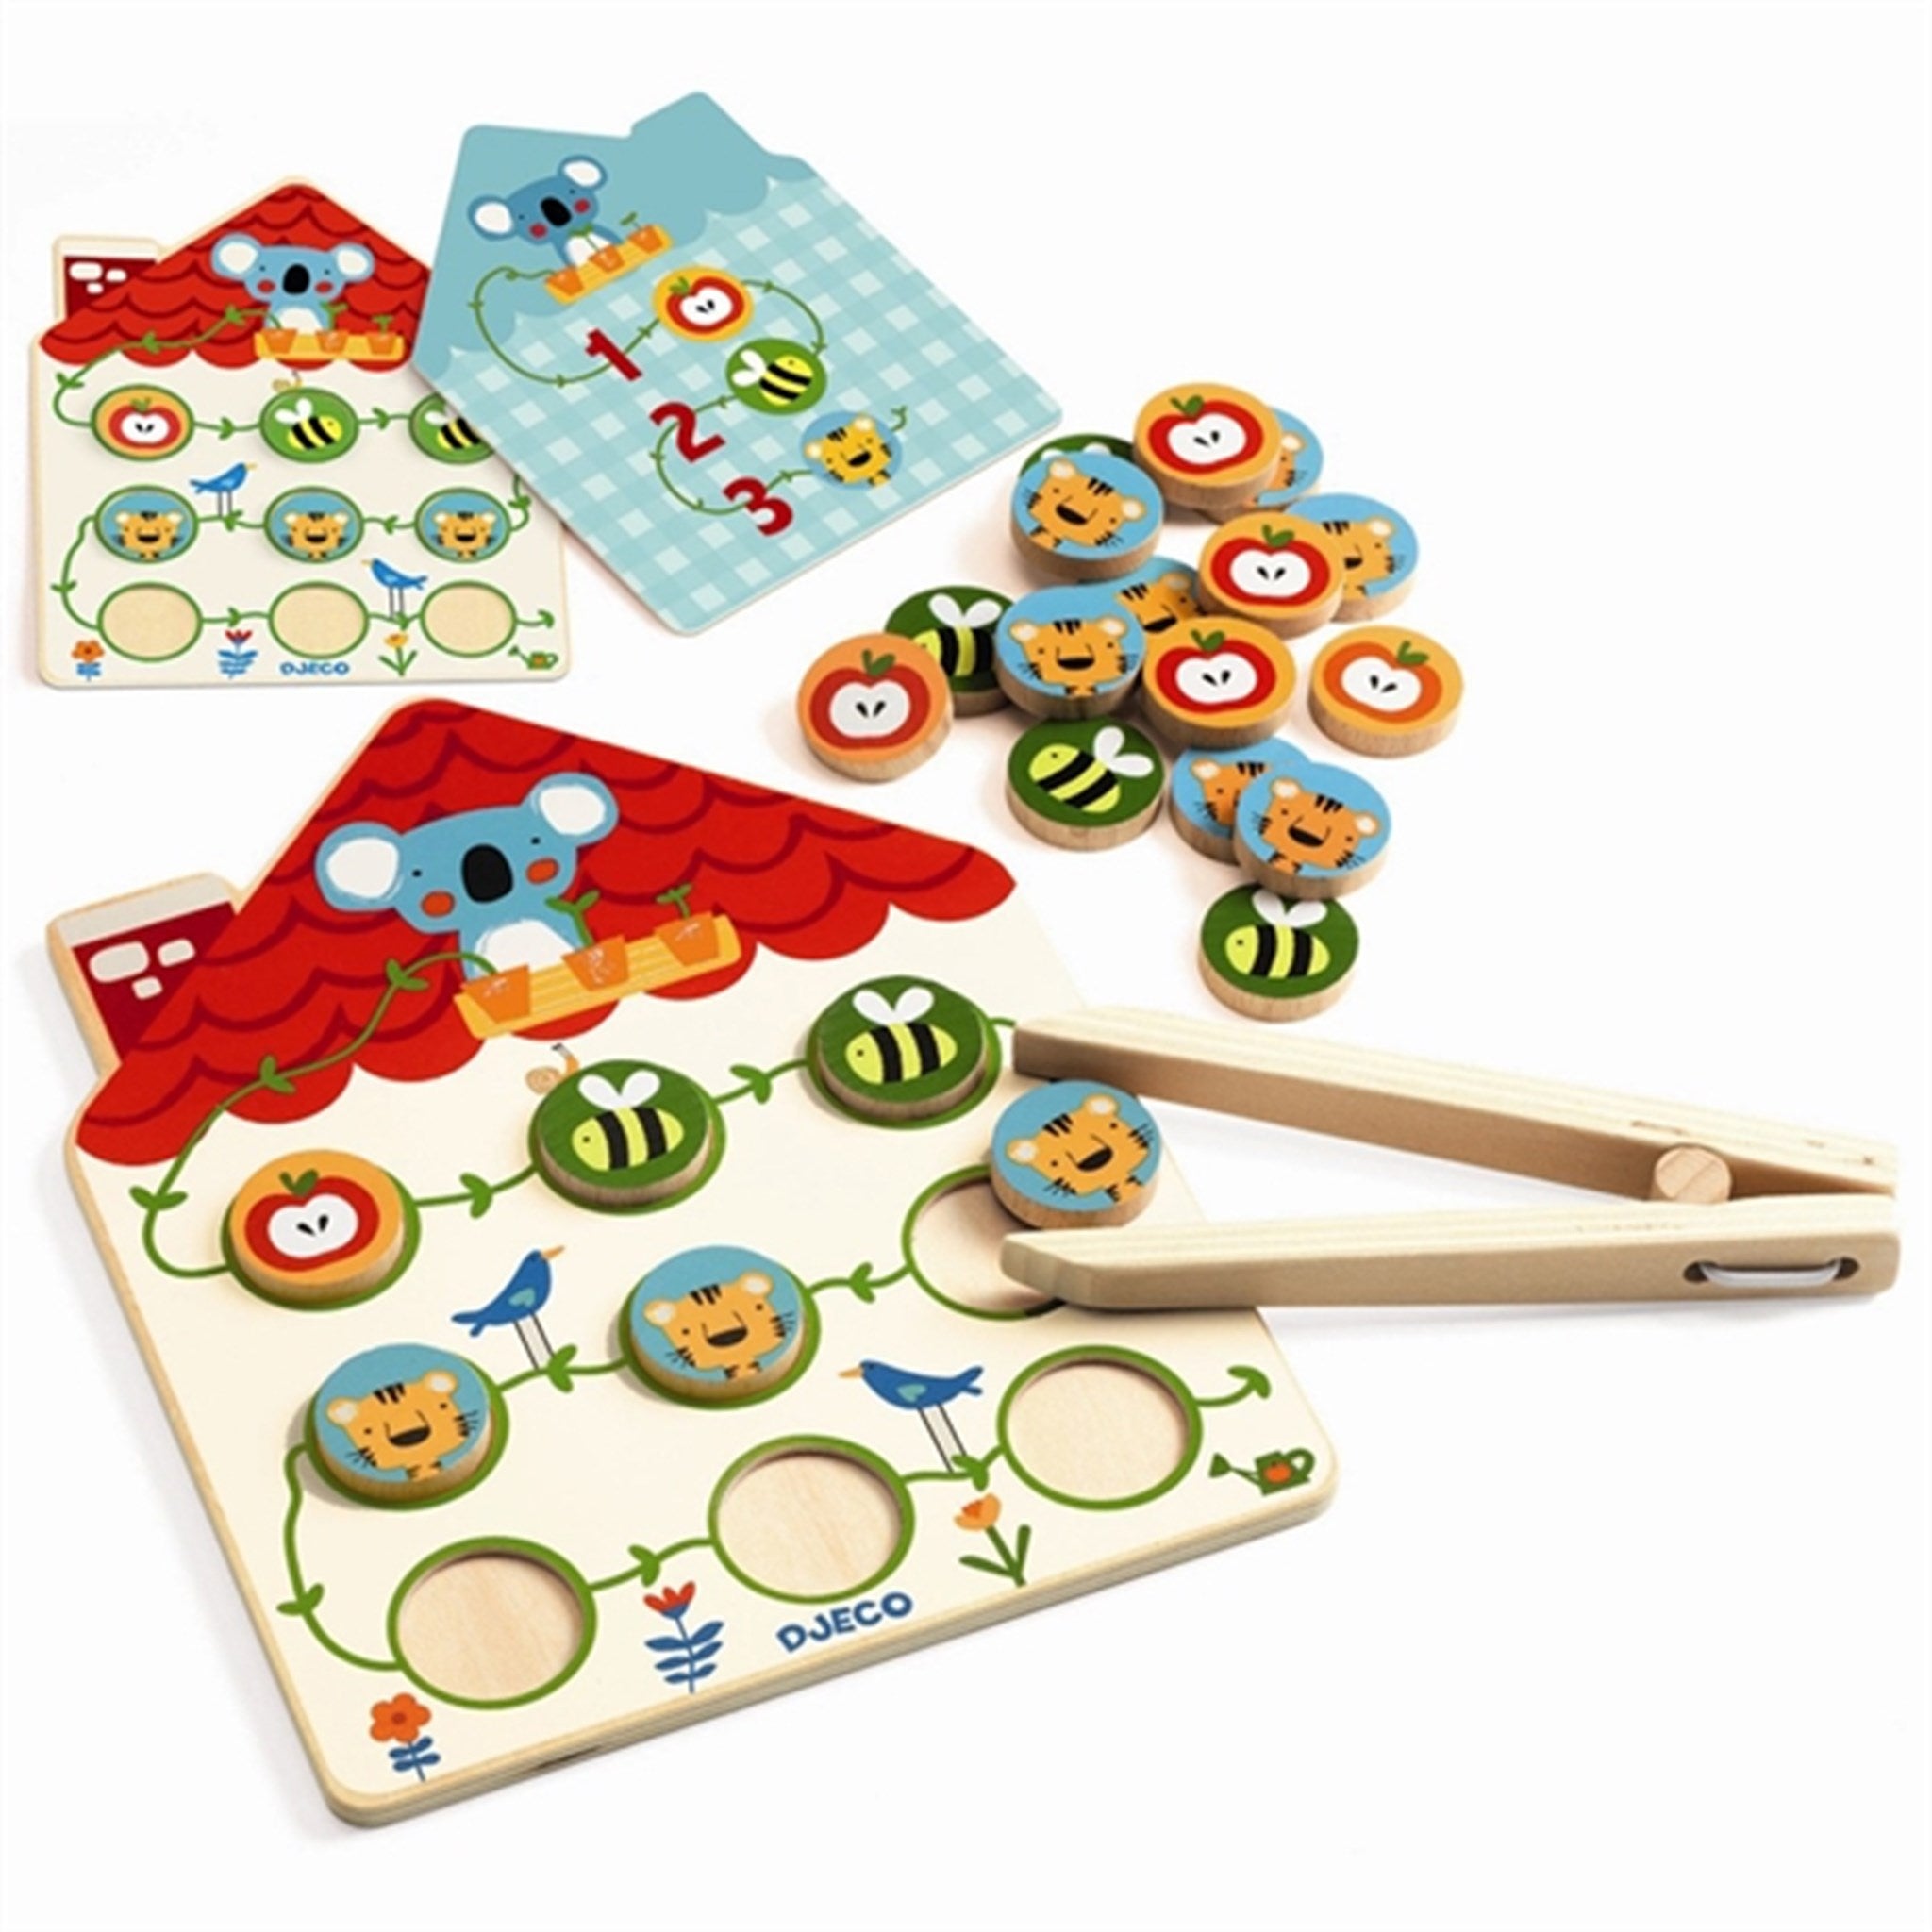 Djeco Wooden Educative Game - Pinstou